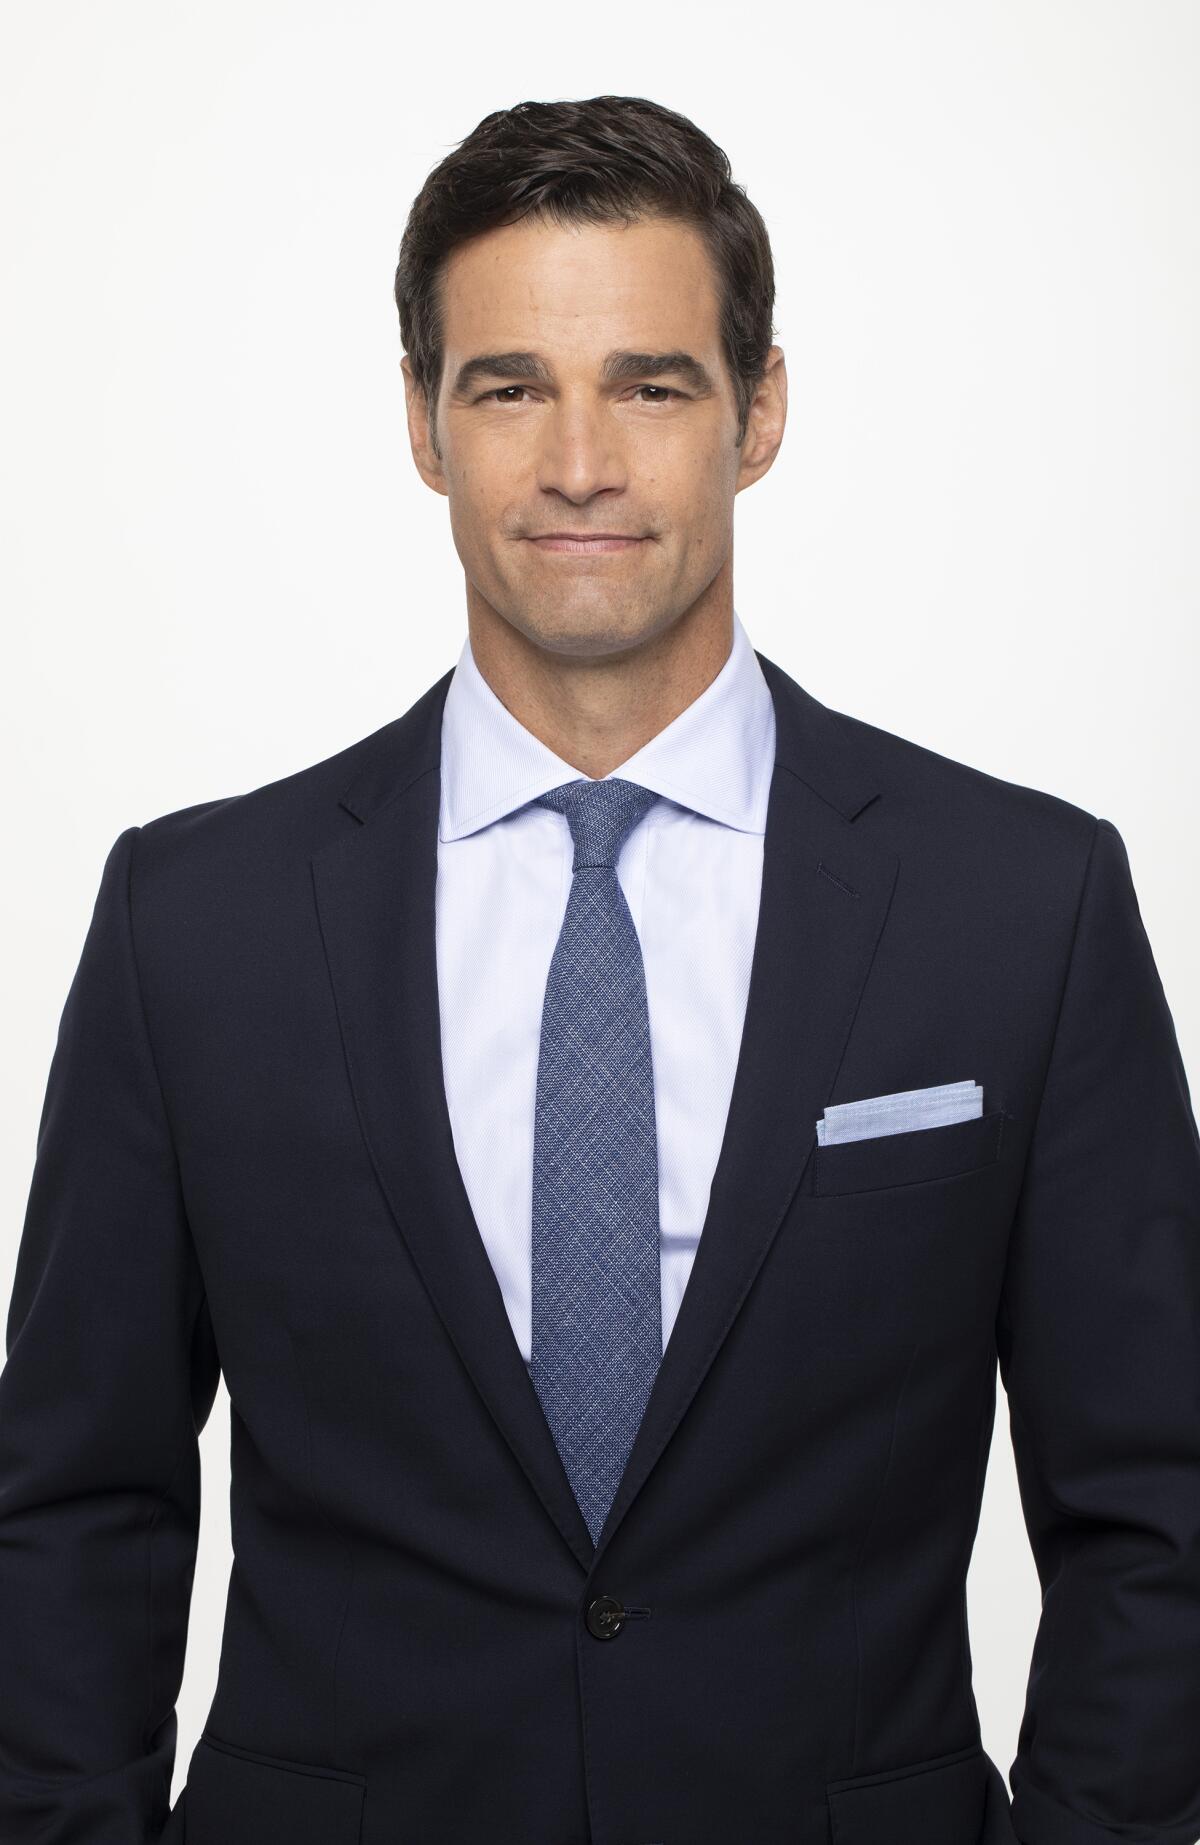 Rob Marciano poses in a dark suit with blue tie.